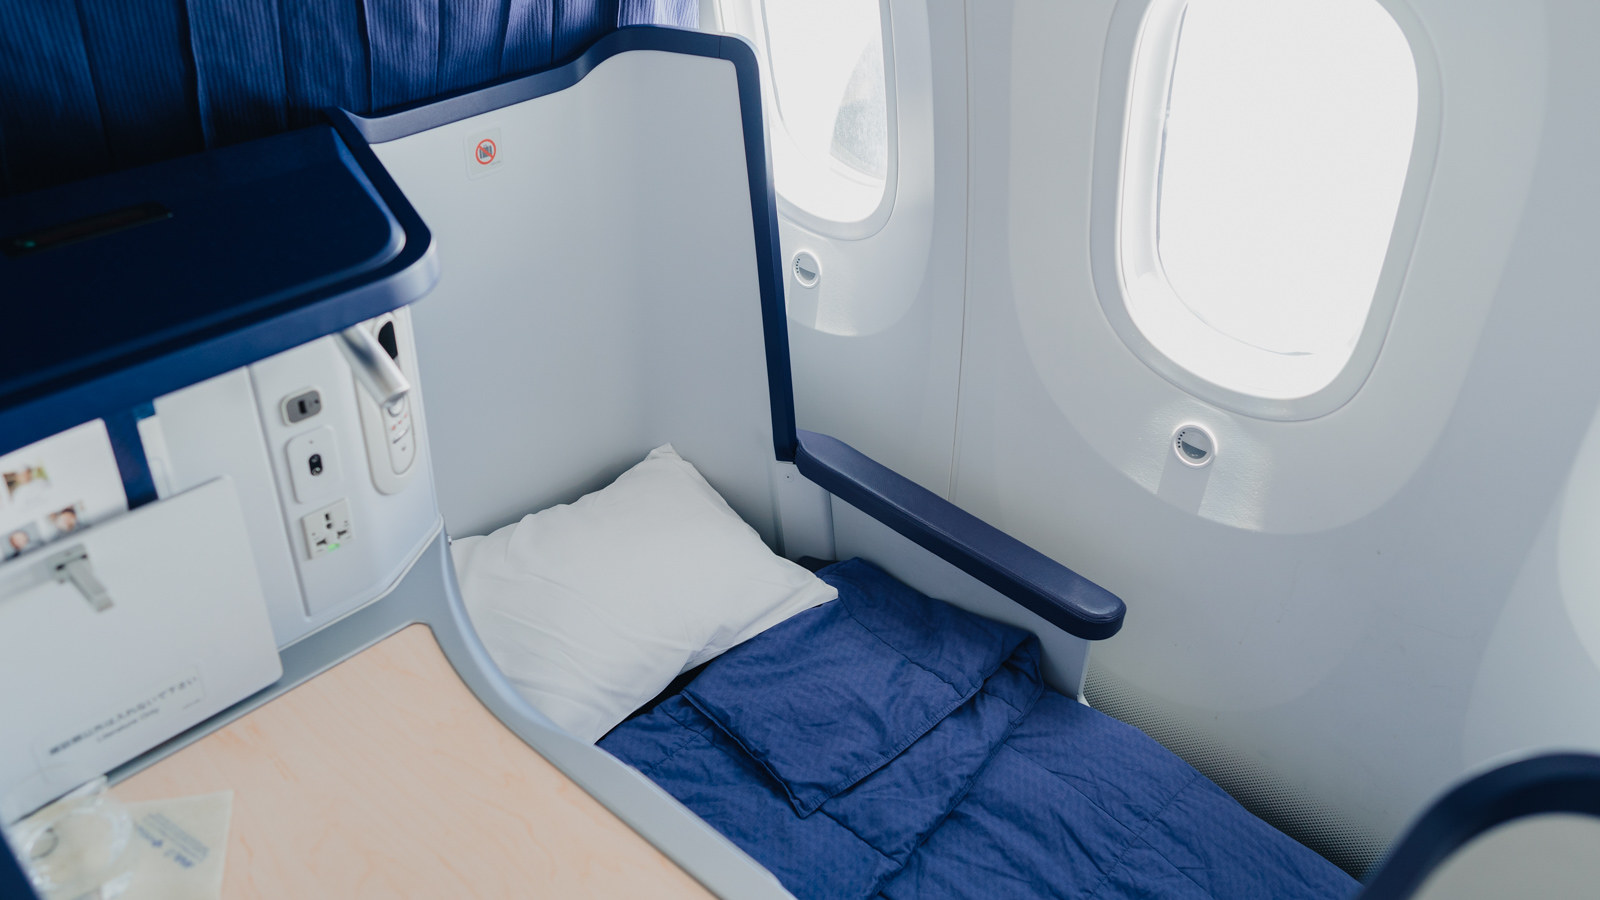 ANA Boeing 787-9 Business Class bed